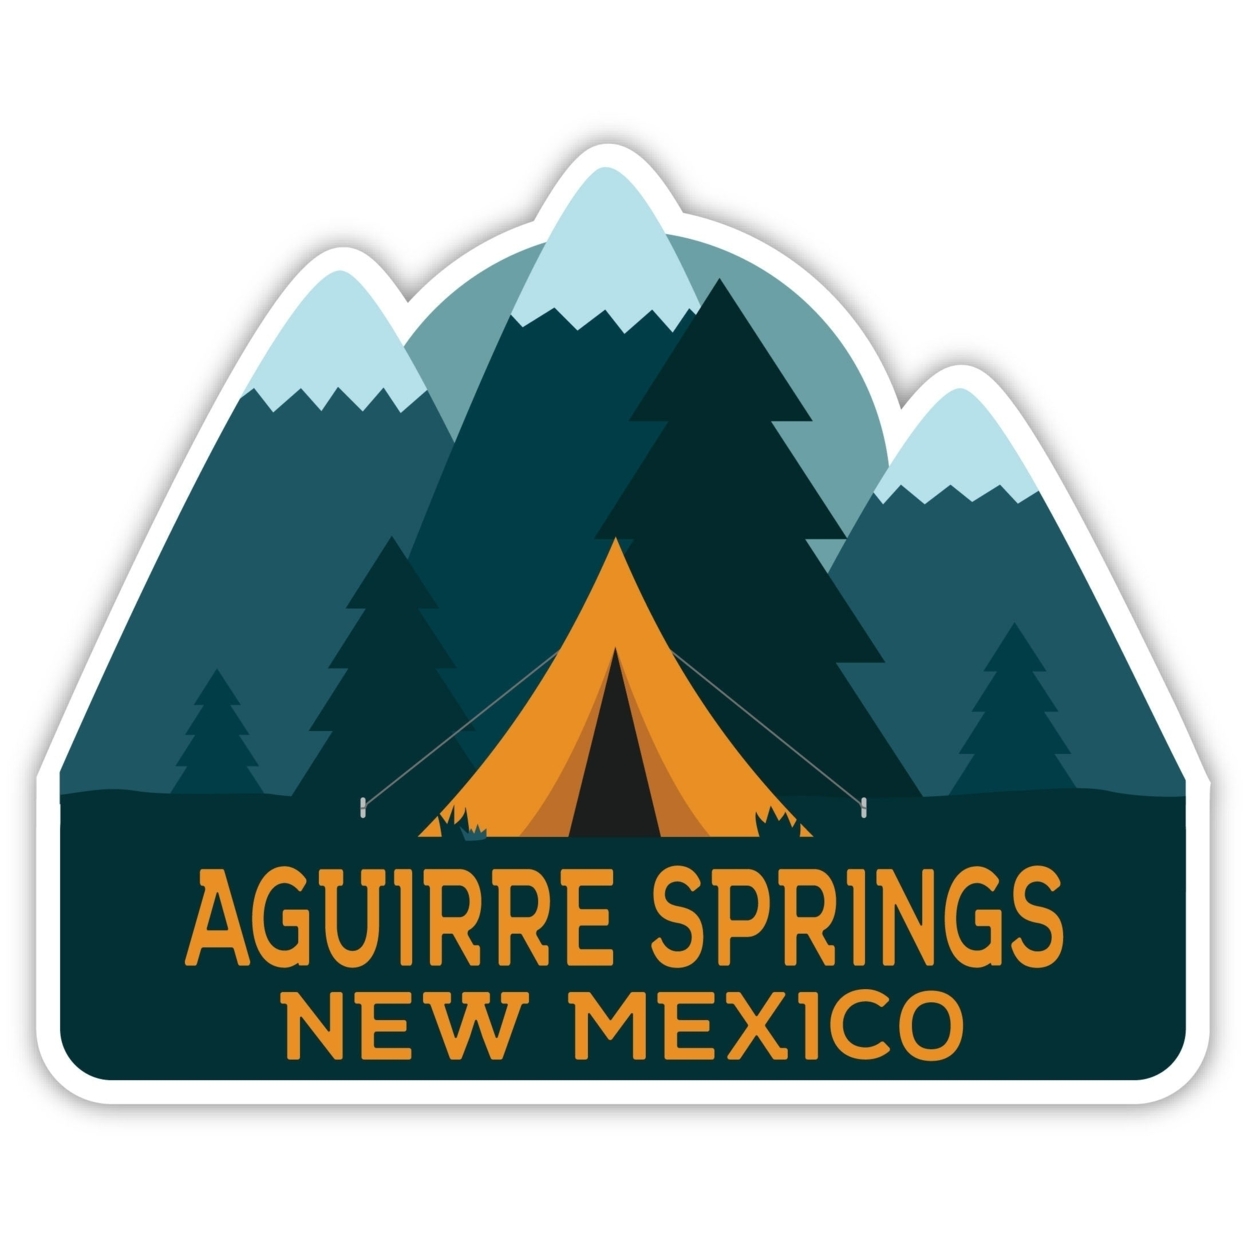 Aguirre Springs New Mexico Souvenir Decorative Stickers (Choose Theme And Size) - Single Unit, 6-Inch, Tent